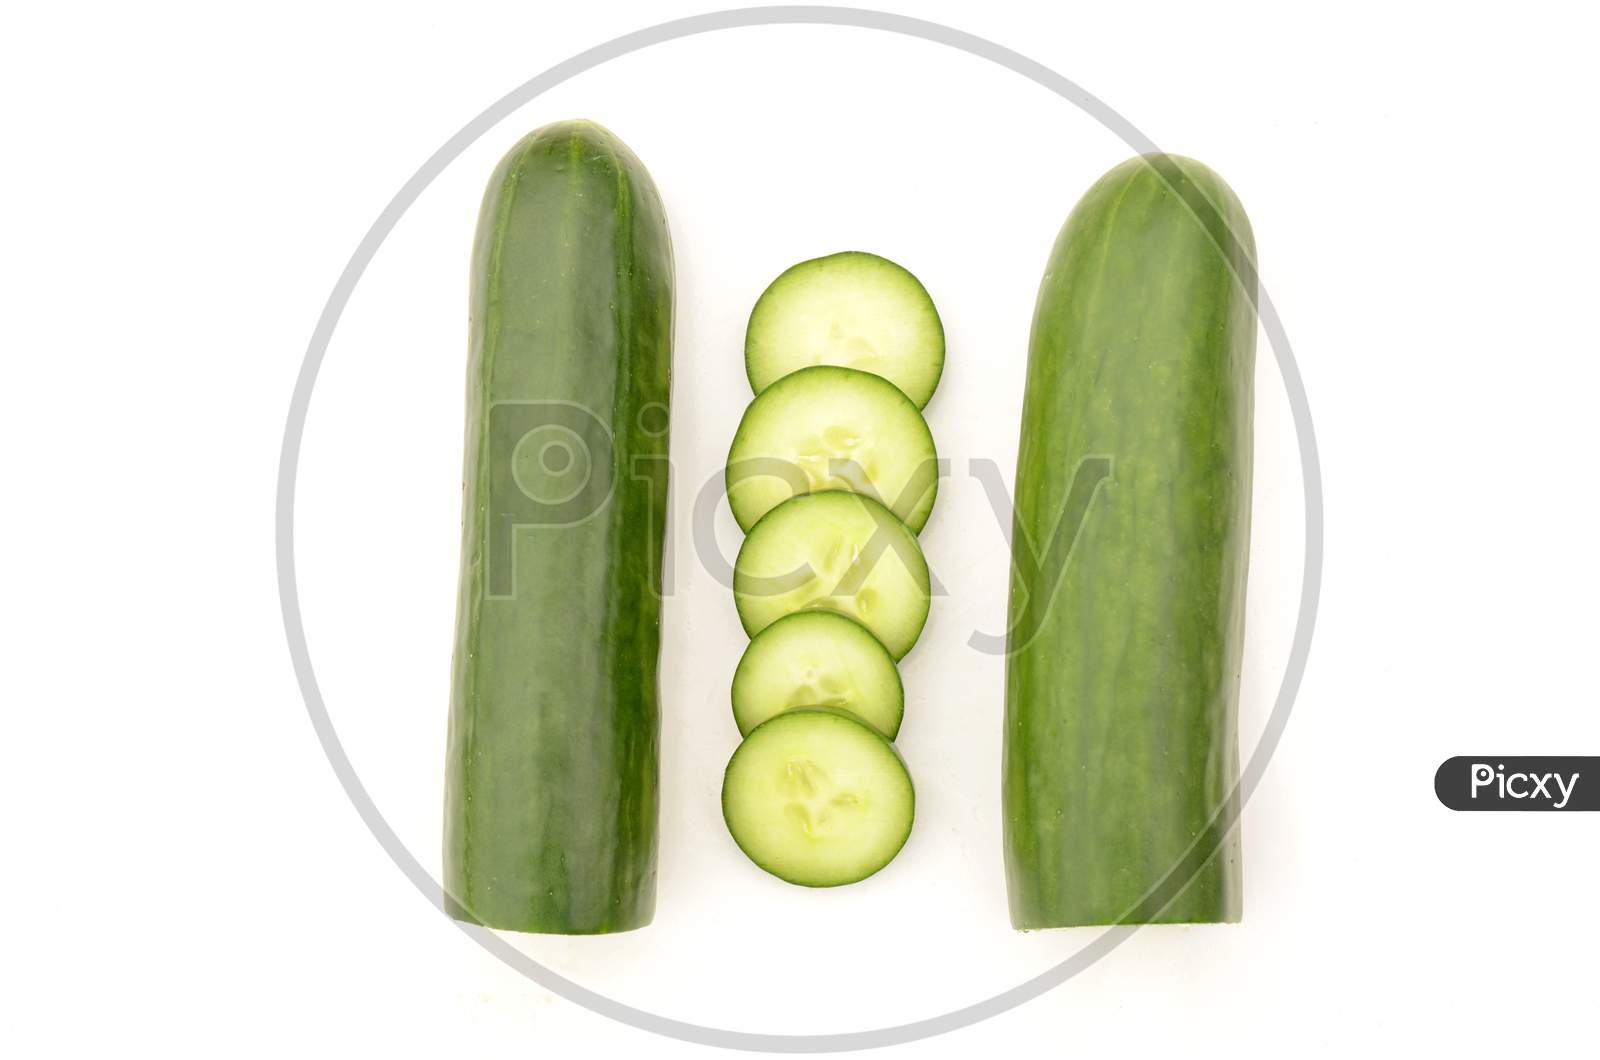 Closeup The Pair Of Sliced Green Ripe Cucumber Isolated On White Background.